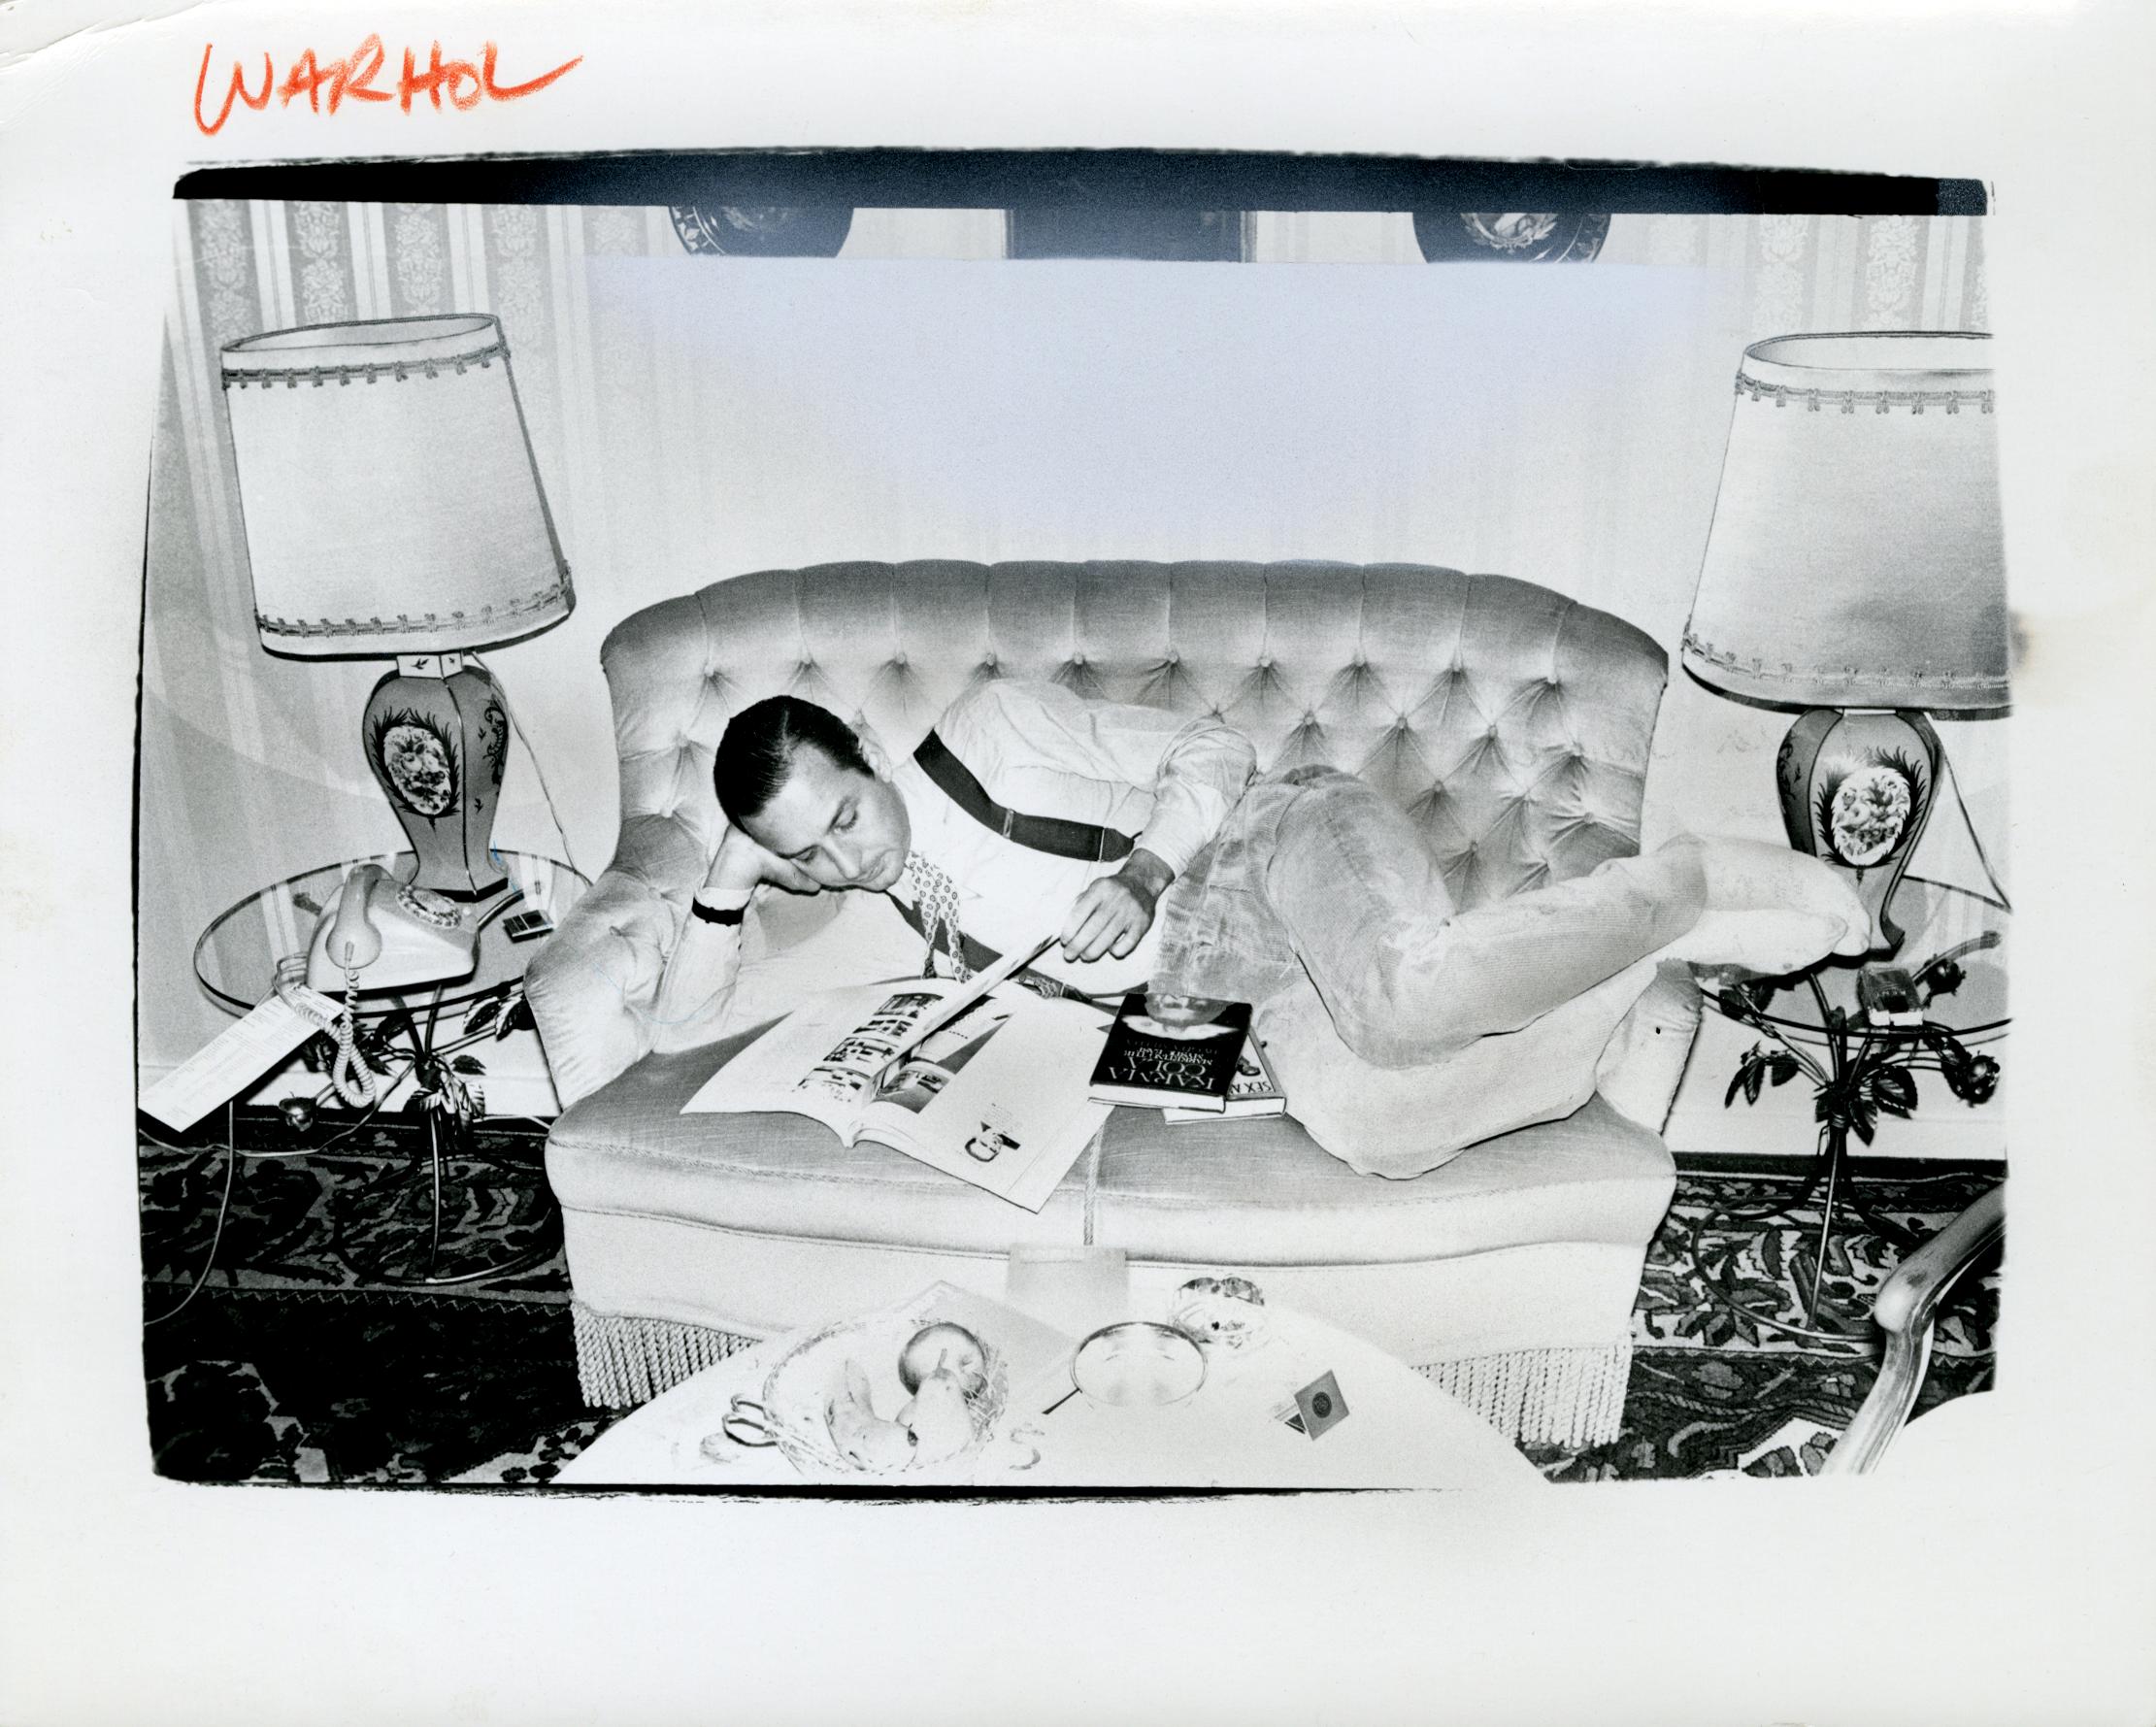 Andy Warhol, Photograph of Fred Hughes Reclining on a Sofa, 1986